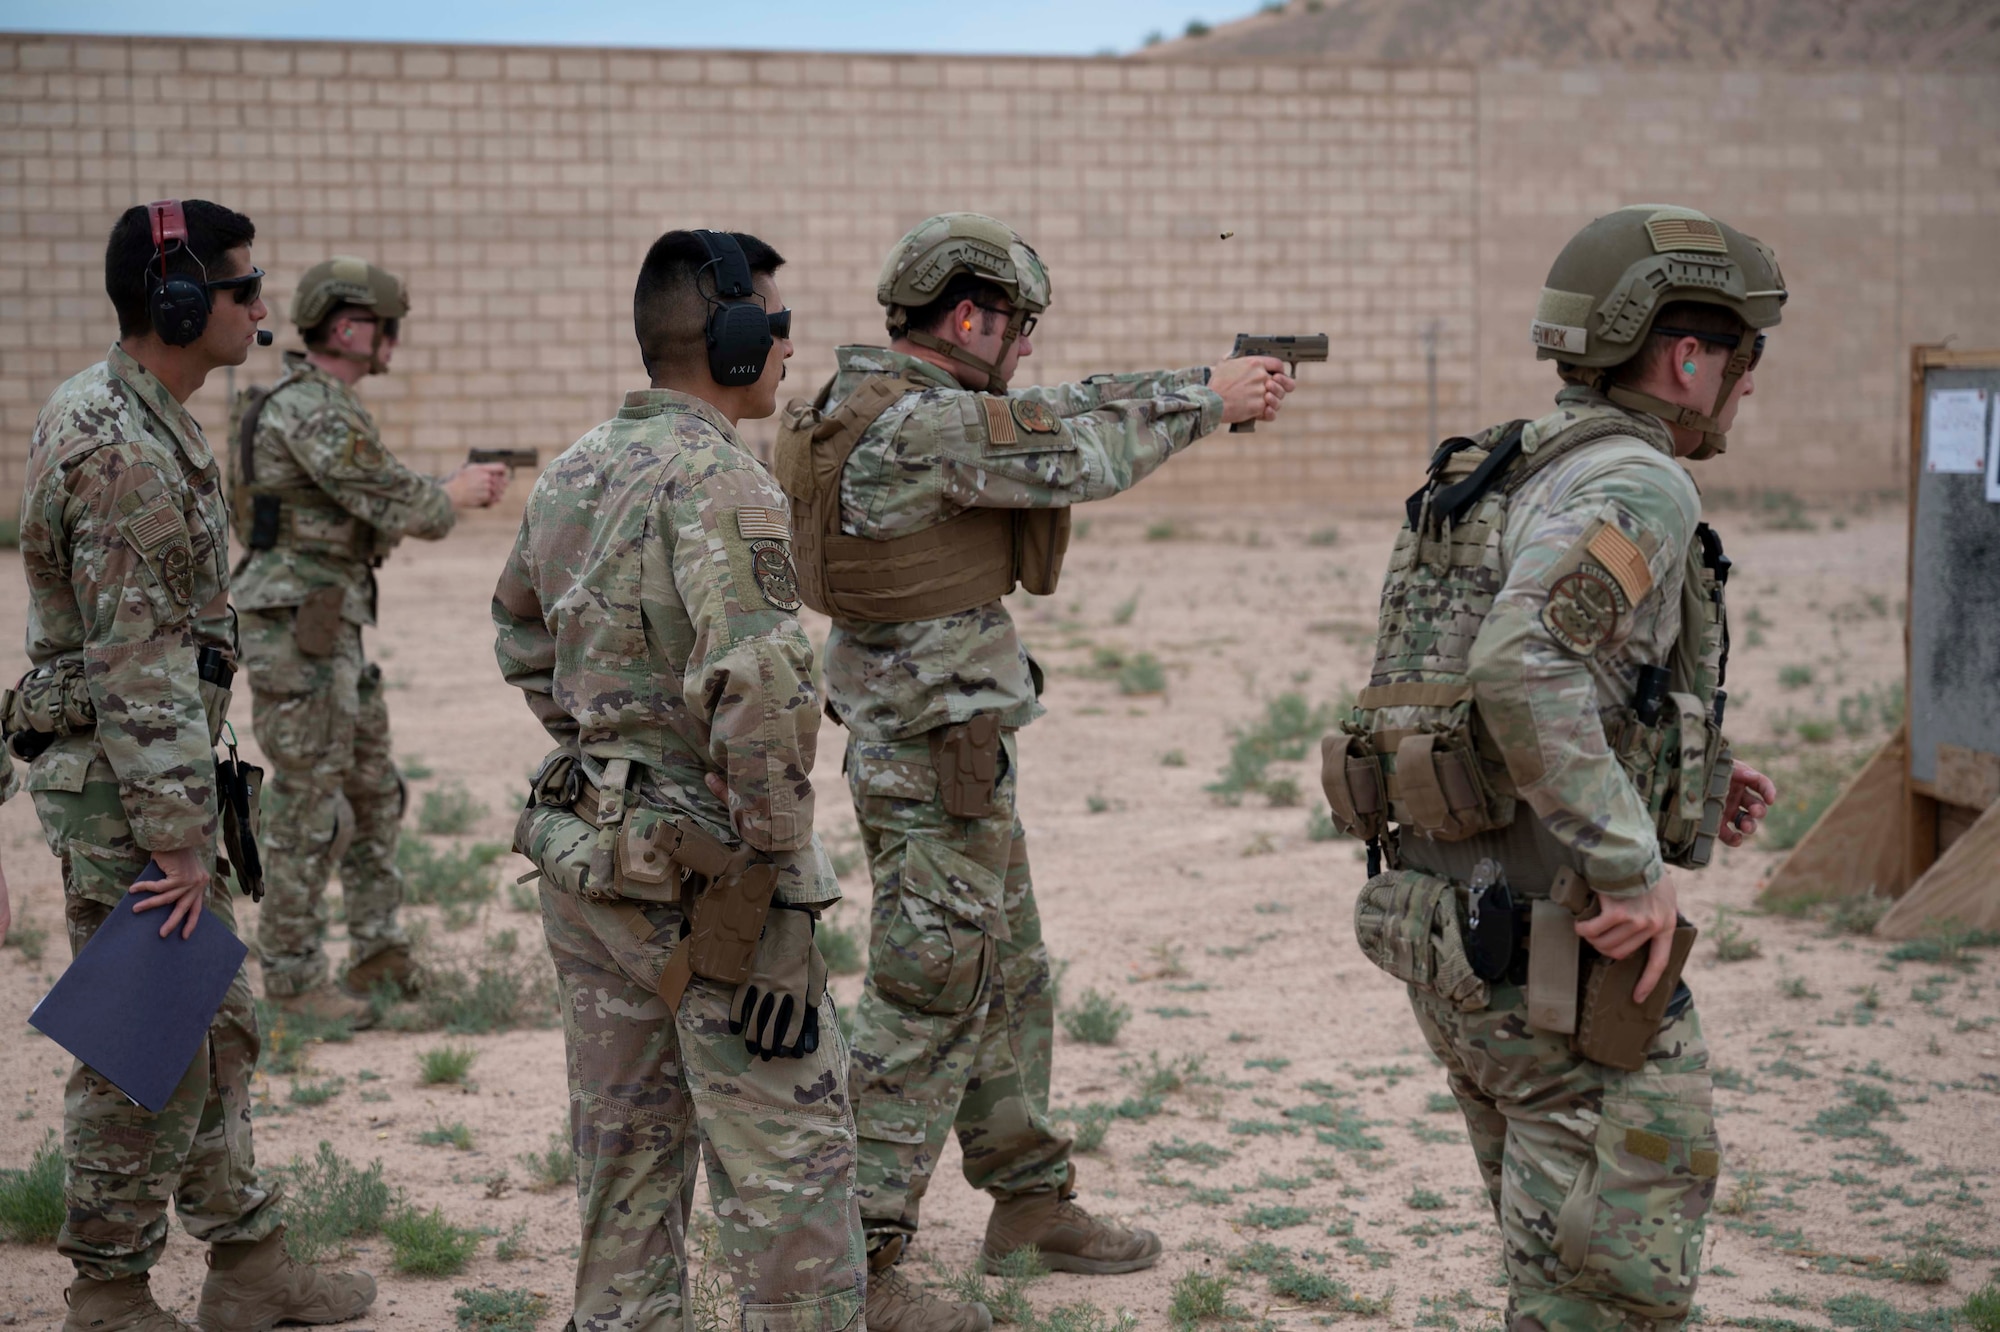 Airmen from the 49th Security Forces Squadron fire their weapons as part of the marksmanship portion of the Special Reaction Team tryouts at Holloman Air Force Base, New Mexico, June 9, 2023. The candidates were evaluated on their marksmanship skills to determine who would be selected for official SRT training at Fort Leonard Wood, Missouri. (U.S. Air Force photo by Airman 1st Class Michelle Ferrari)